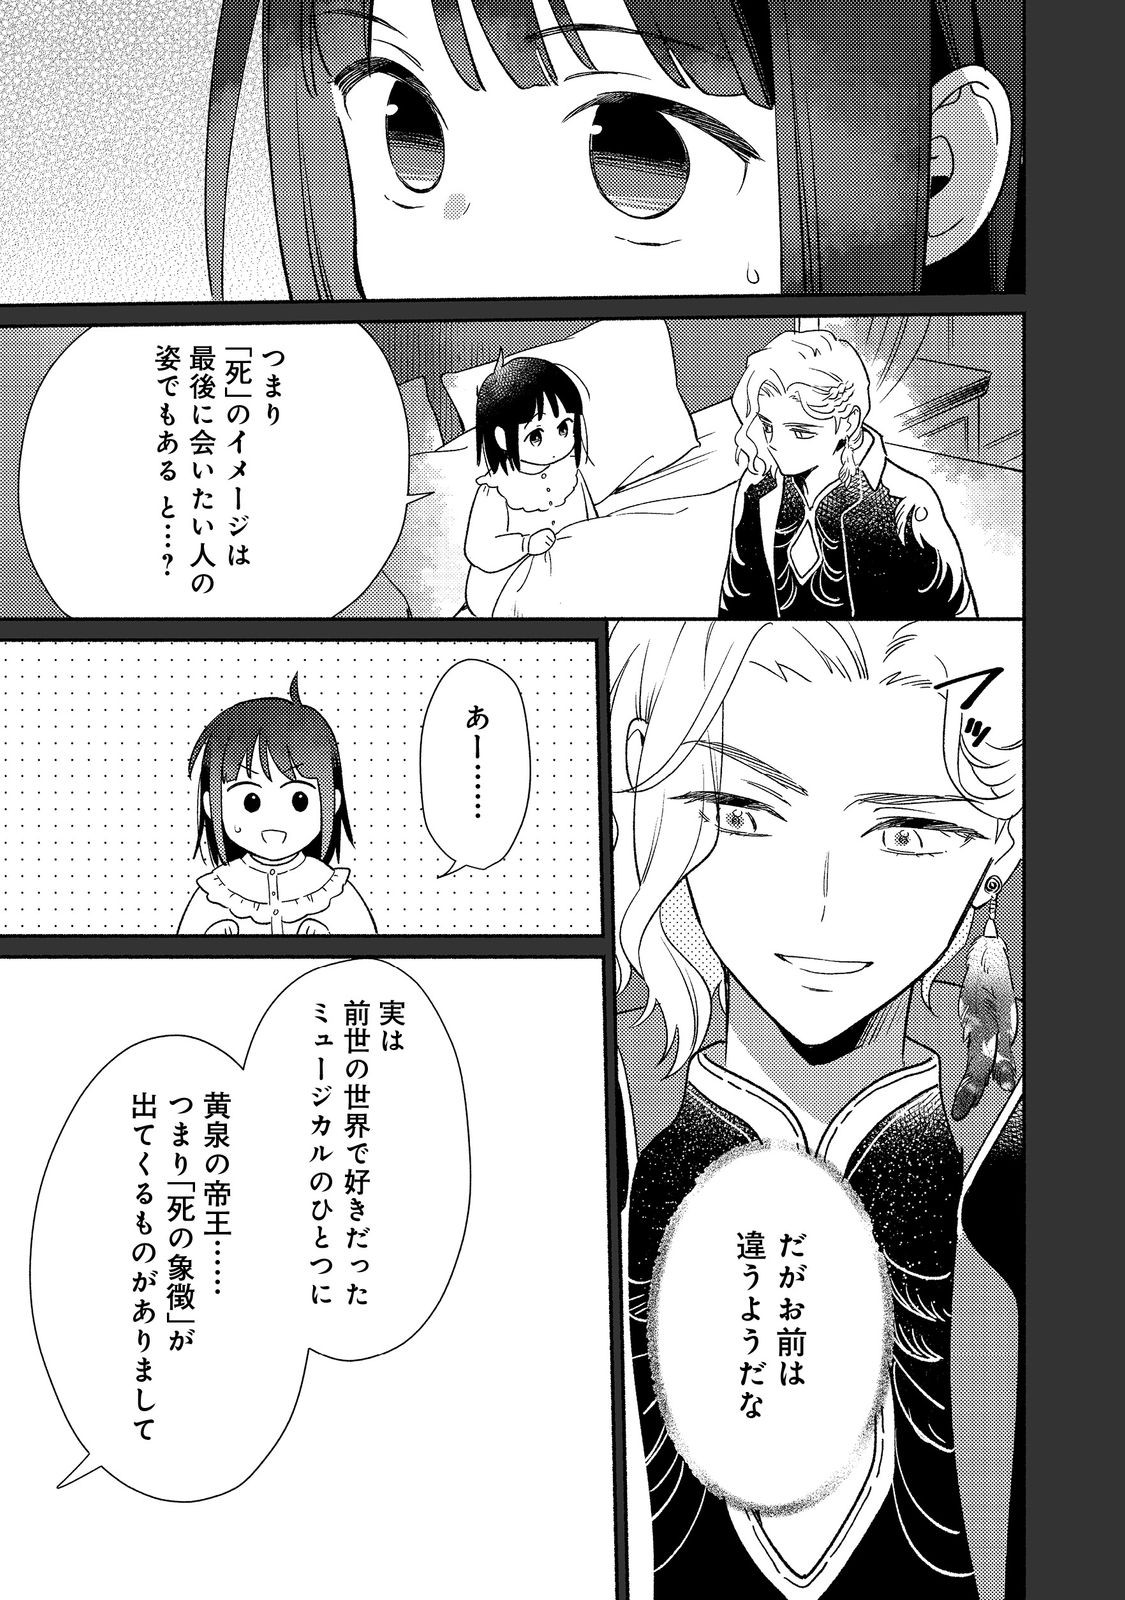 I’m the White Pig Nobleman 第22.1話 - Page 7